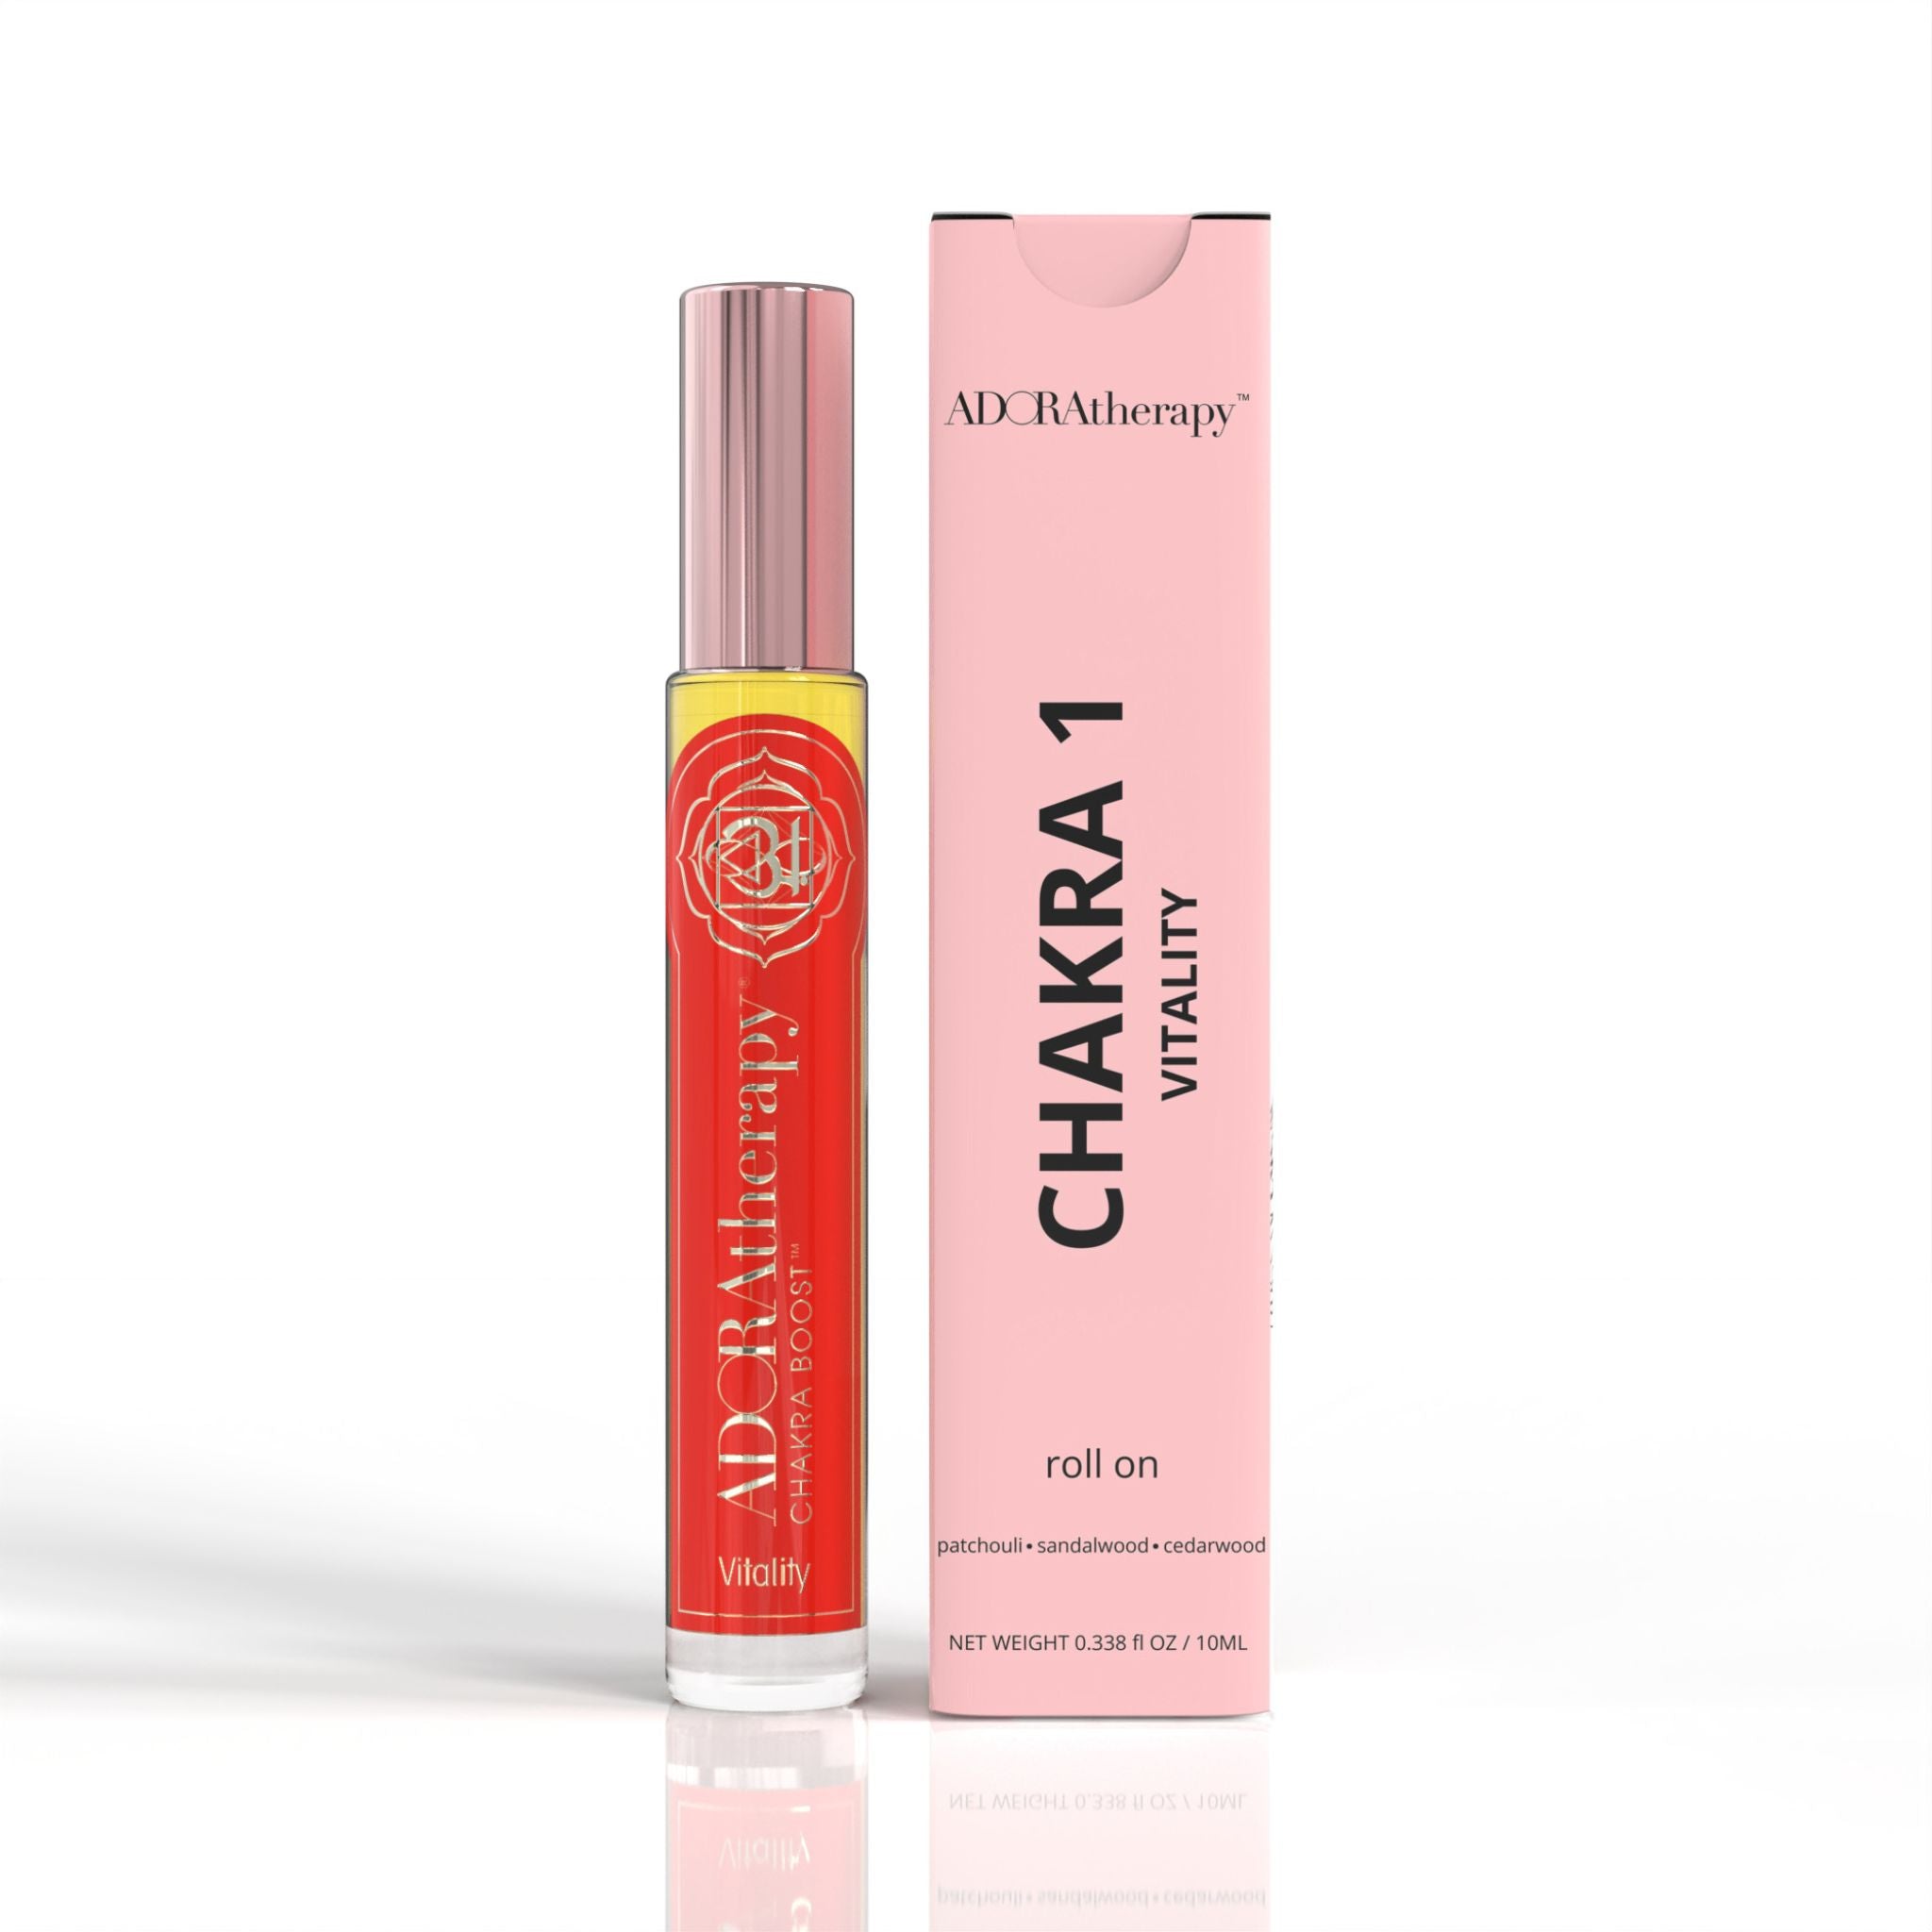 Chakra 1 Vitality Roll On Perfume Oil by Adoratherapy.com